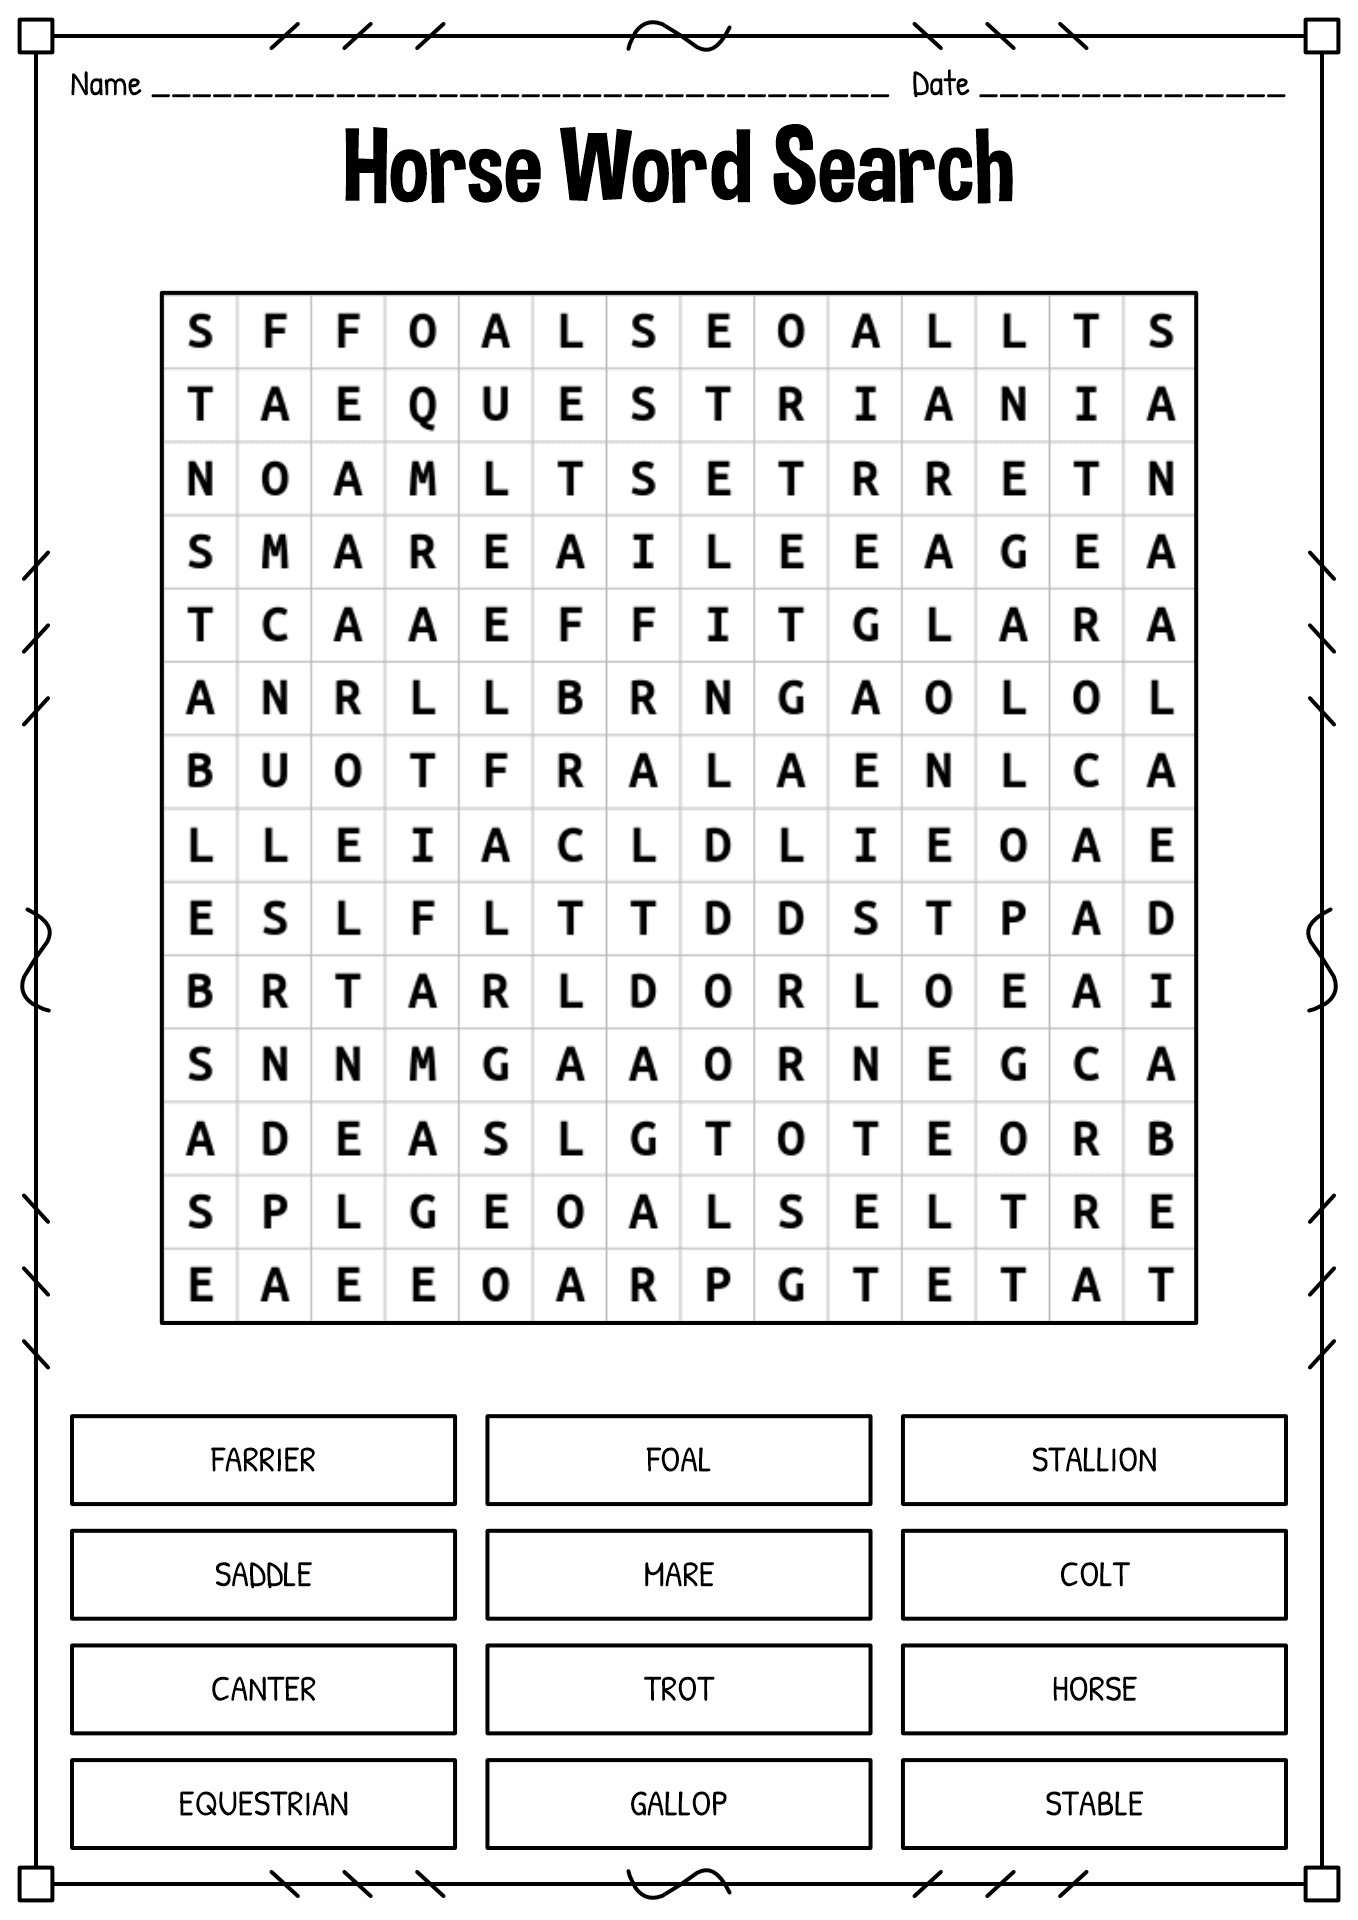 Horse Word Search Printable Image